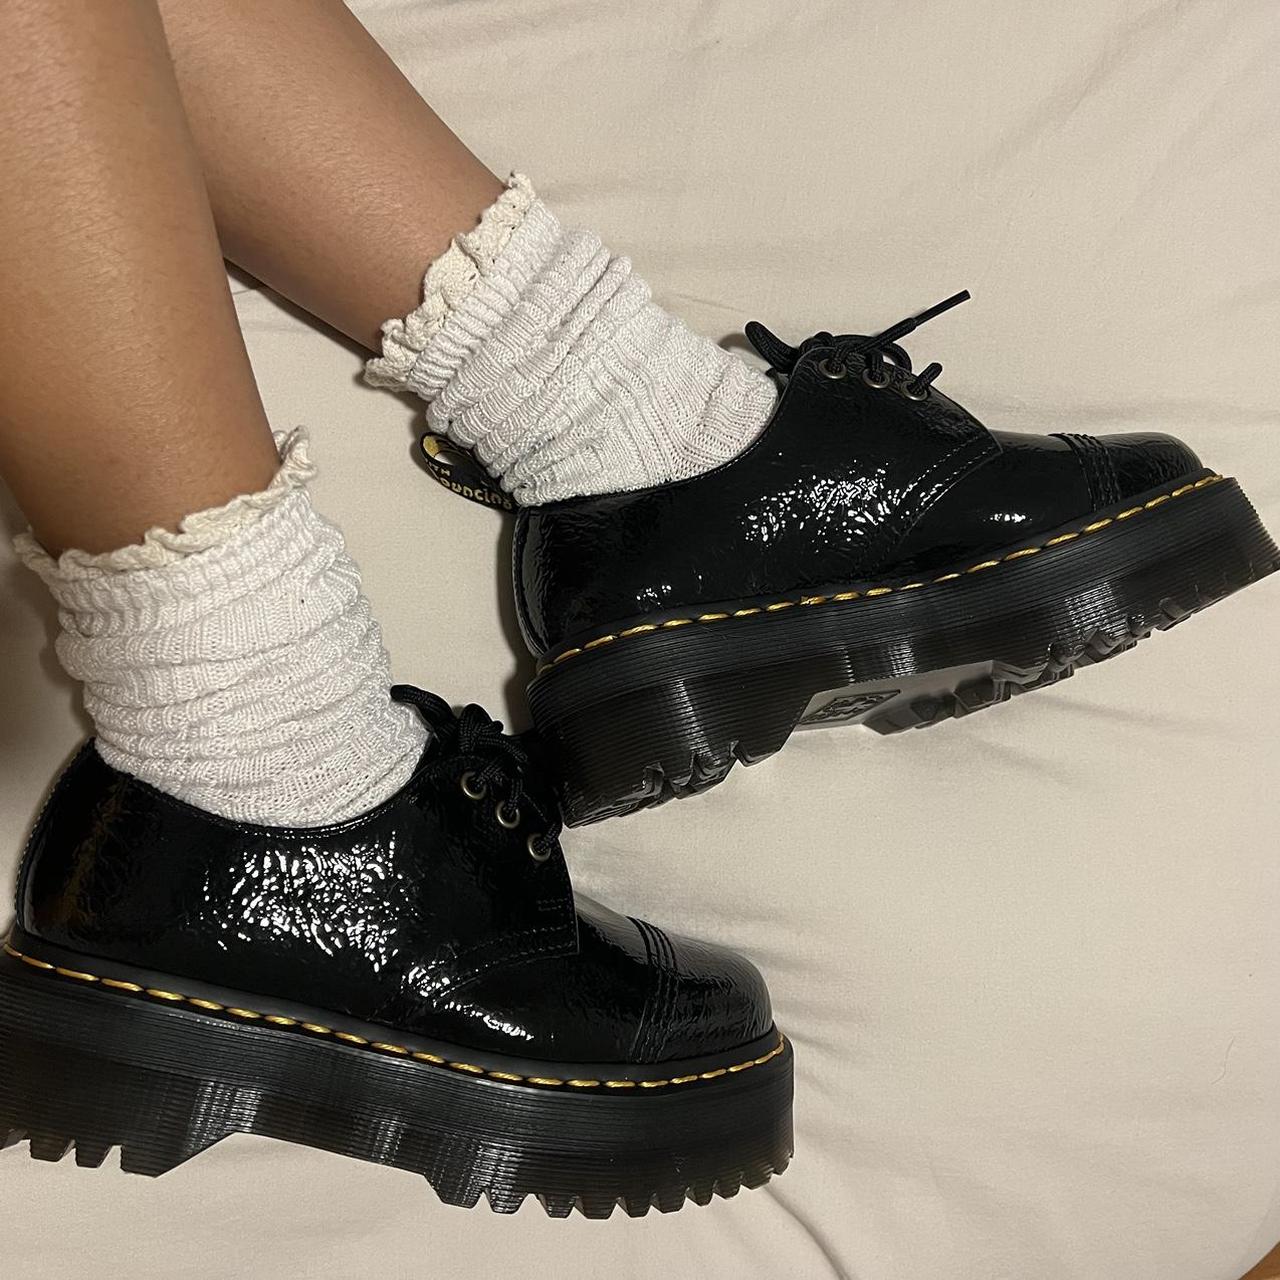 Dr. Martens Women's Black and Yellow Oxfords | Depop